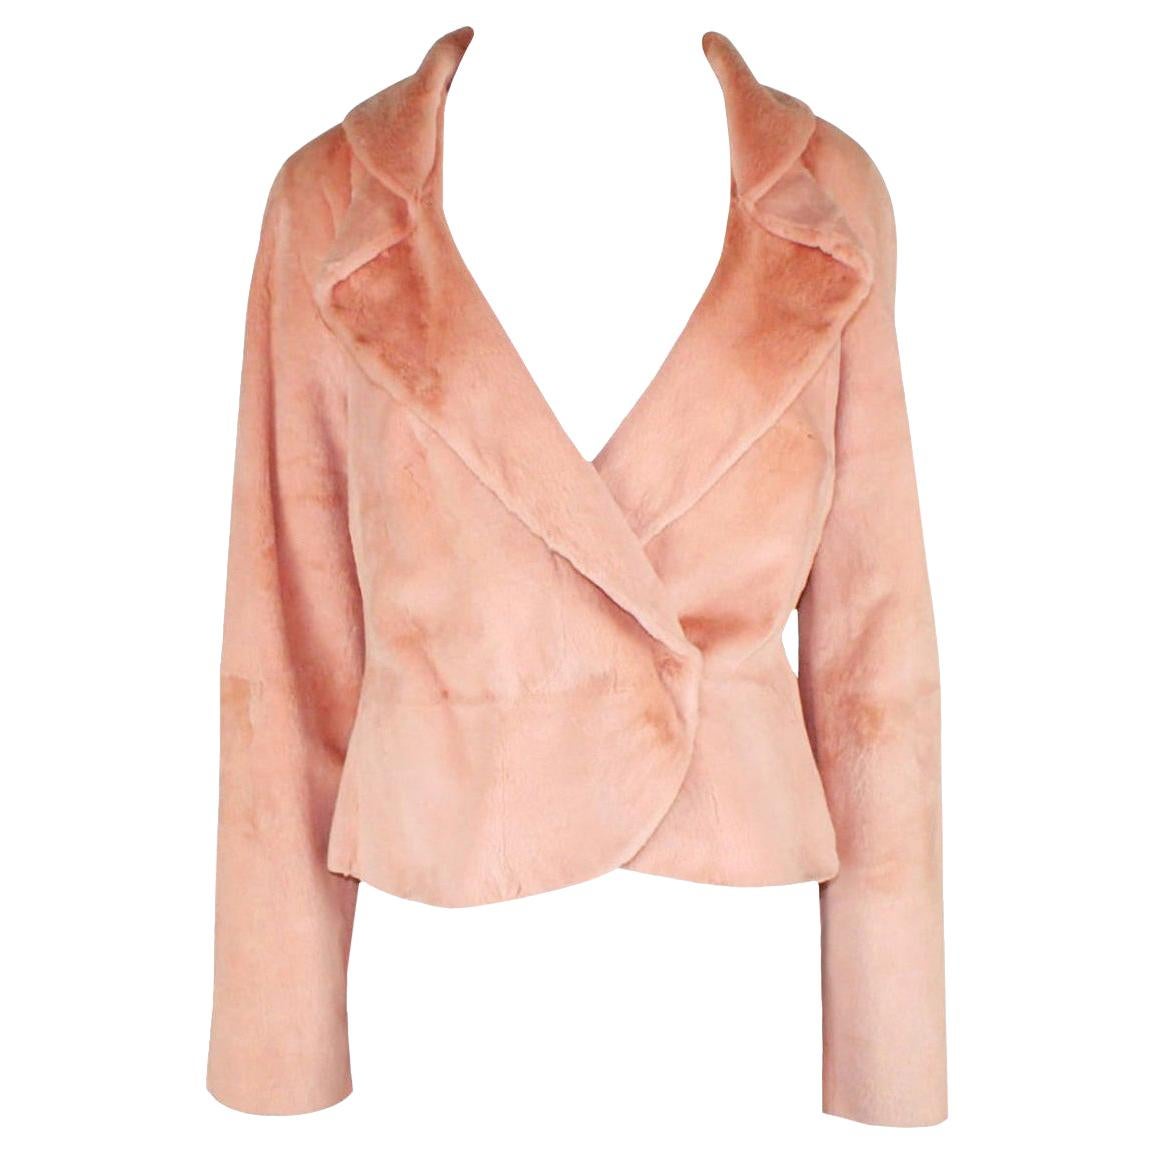 NEW Gianni Versace Couture Blush Pink Nude Fur Jacket Coat 42